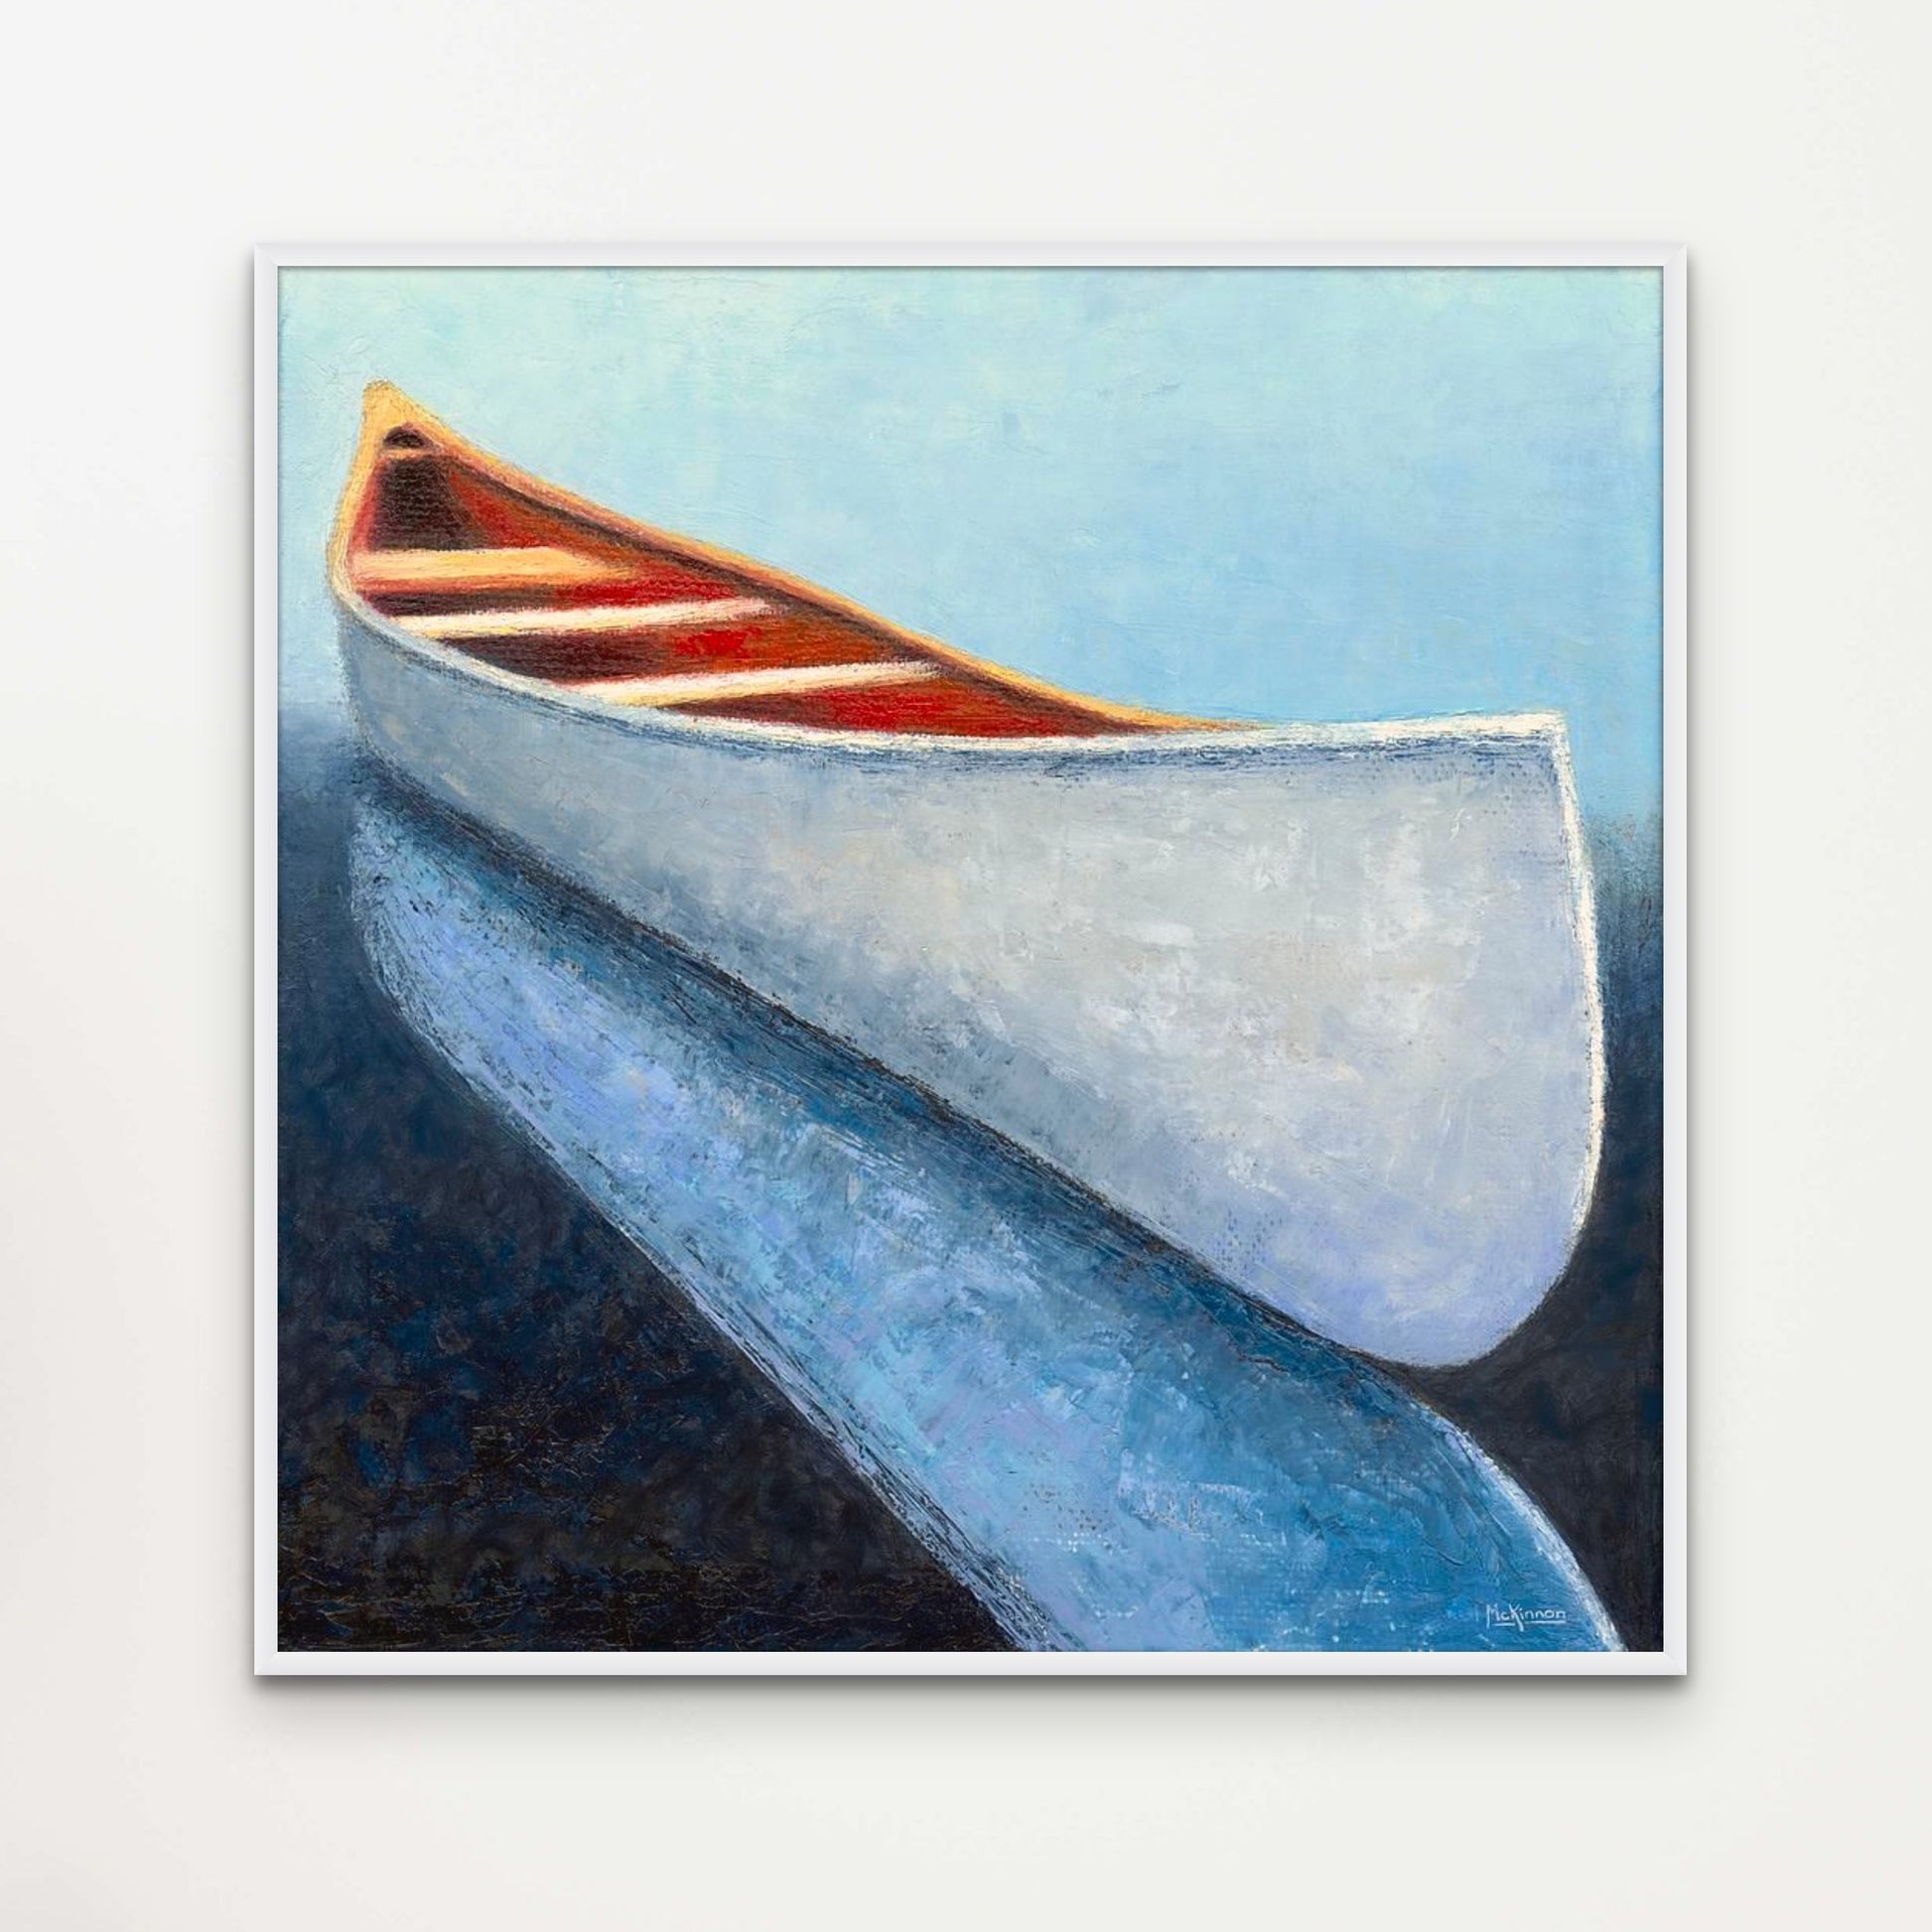 A coastal painting of a white canoe reflected in dark, navy blue water by Canadian artist Catherine McKinnon. This giclee print of the art piece is framed in white and mounted on a light grey wall as modern farmhouse style wall decor.